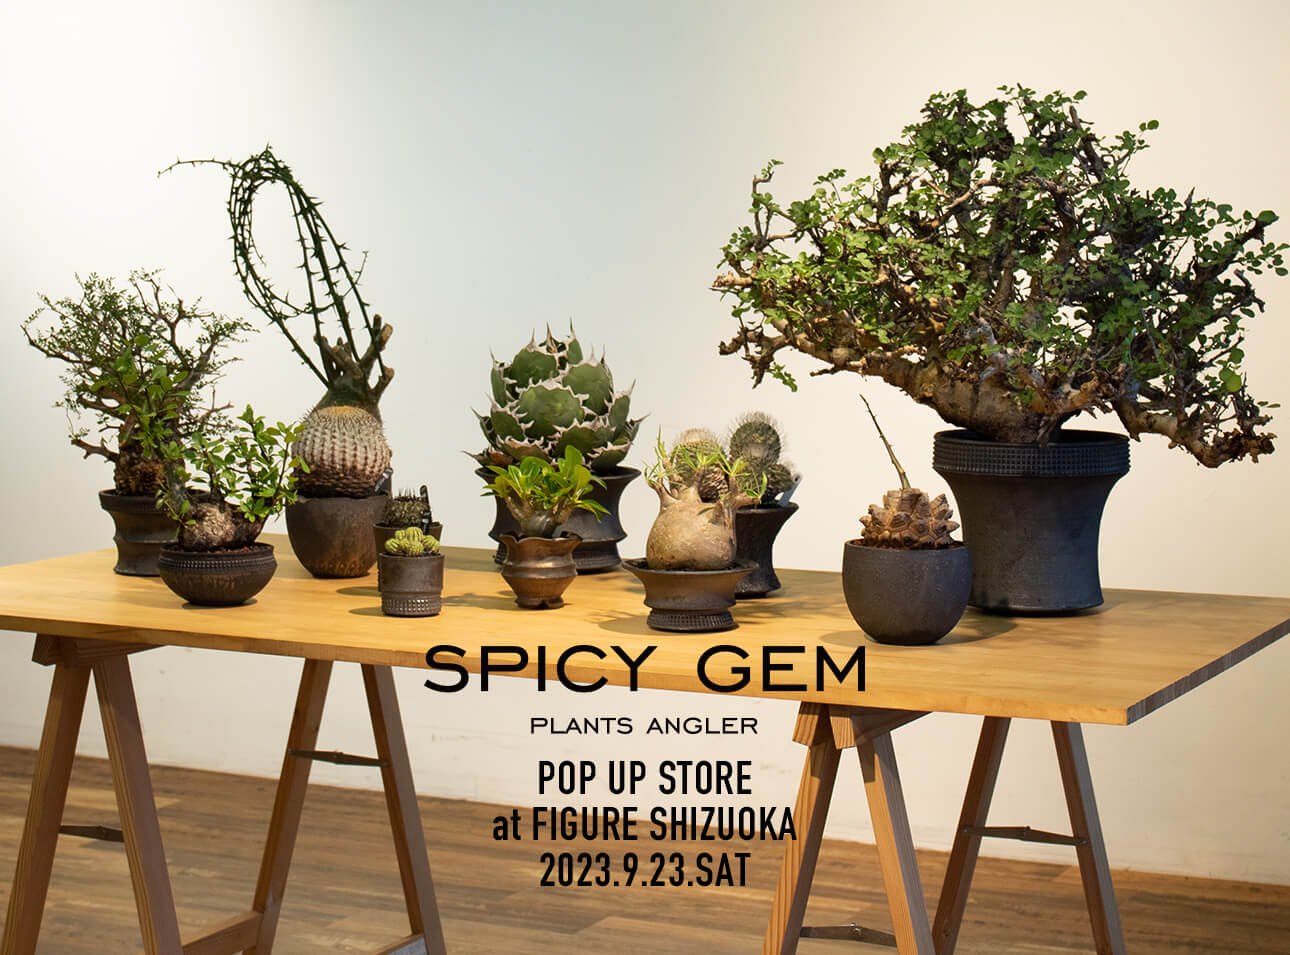 spicy gem POP UP STORE at FIGURE SHIZUOKA